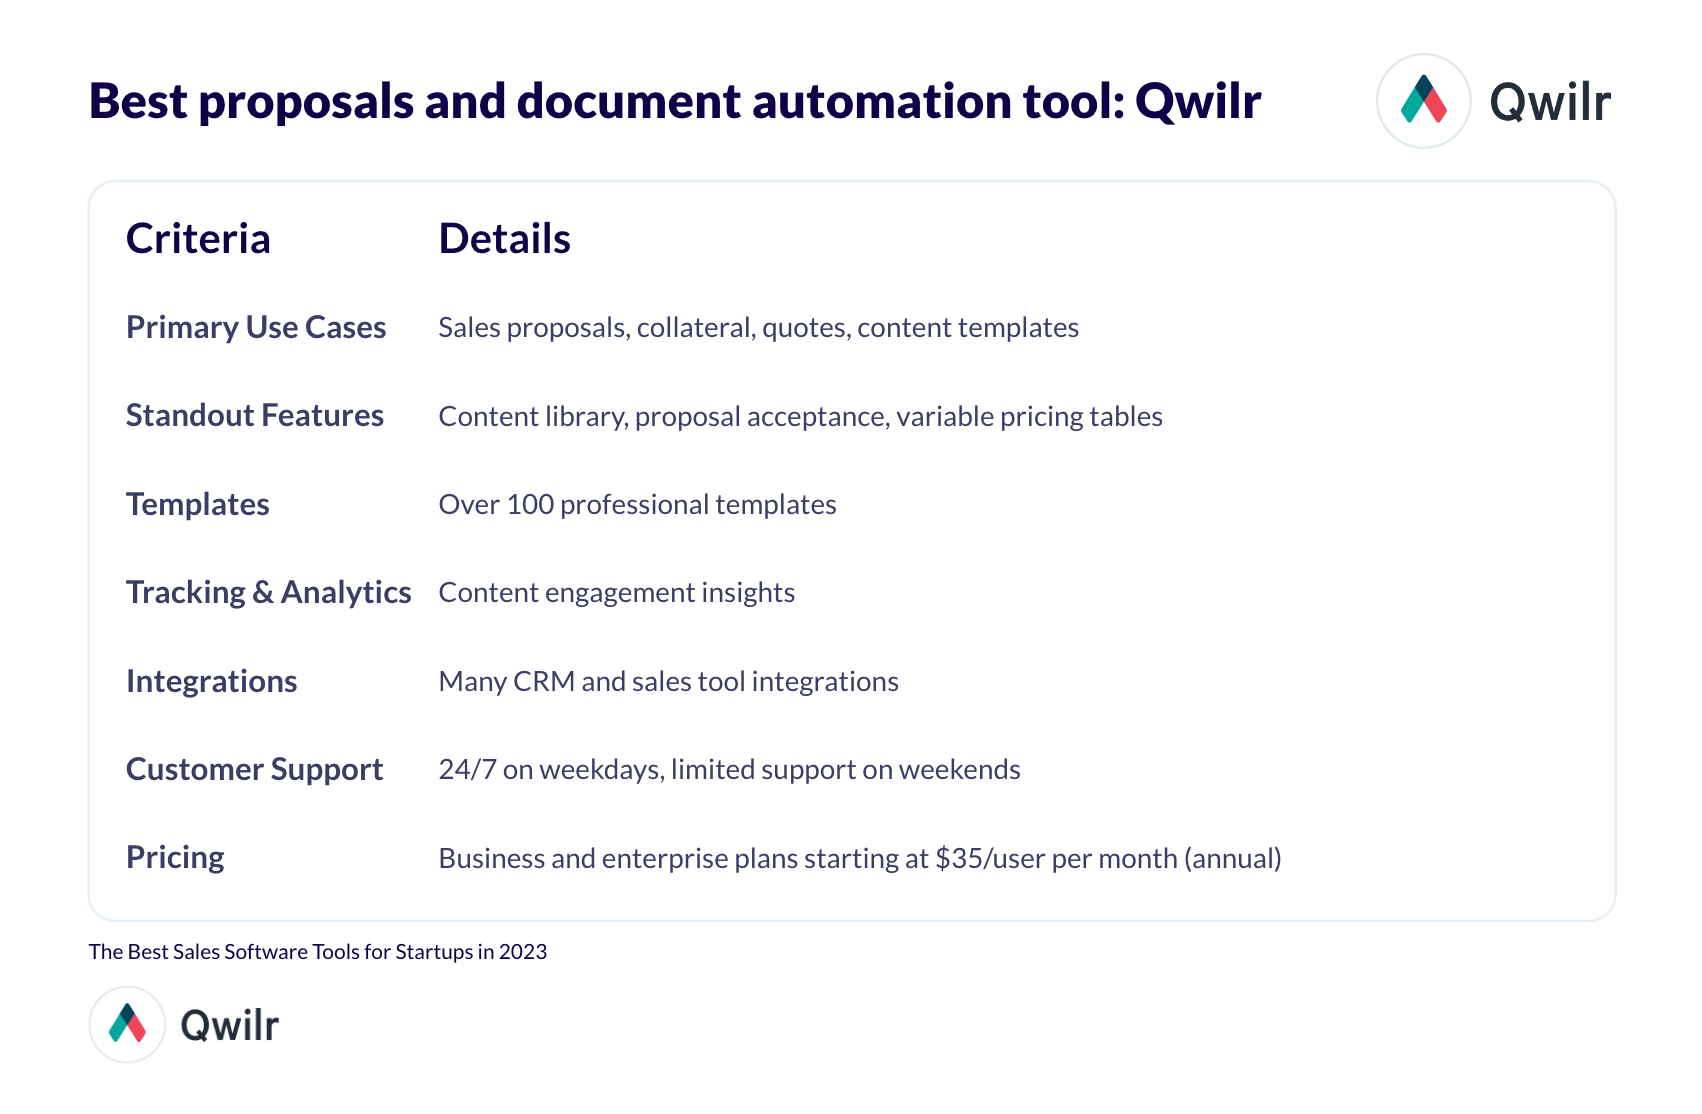 A table summarizing Qwilr's features